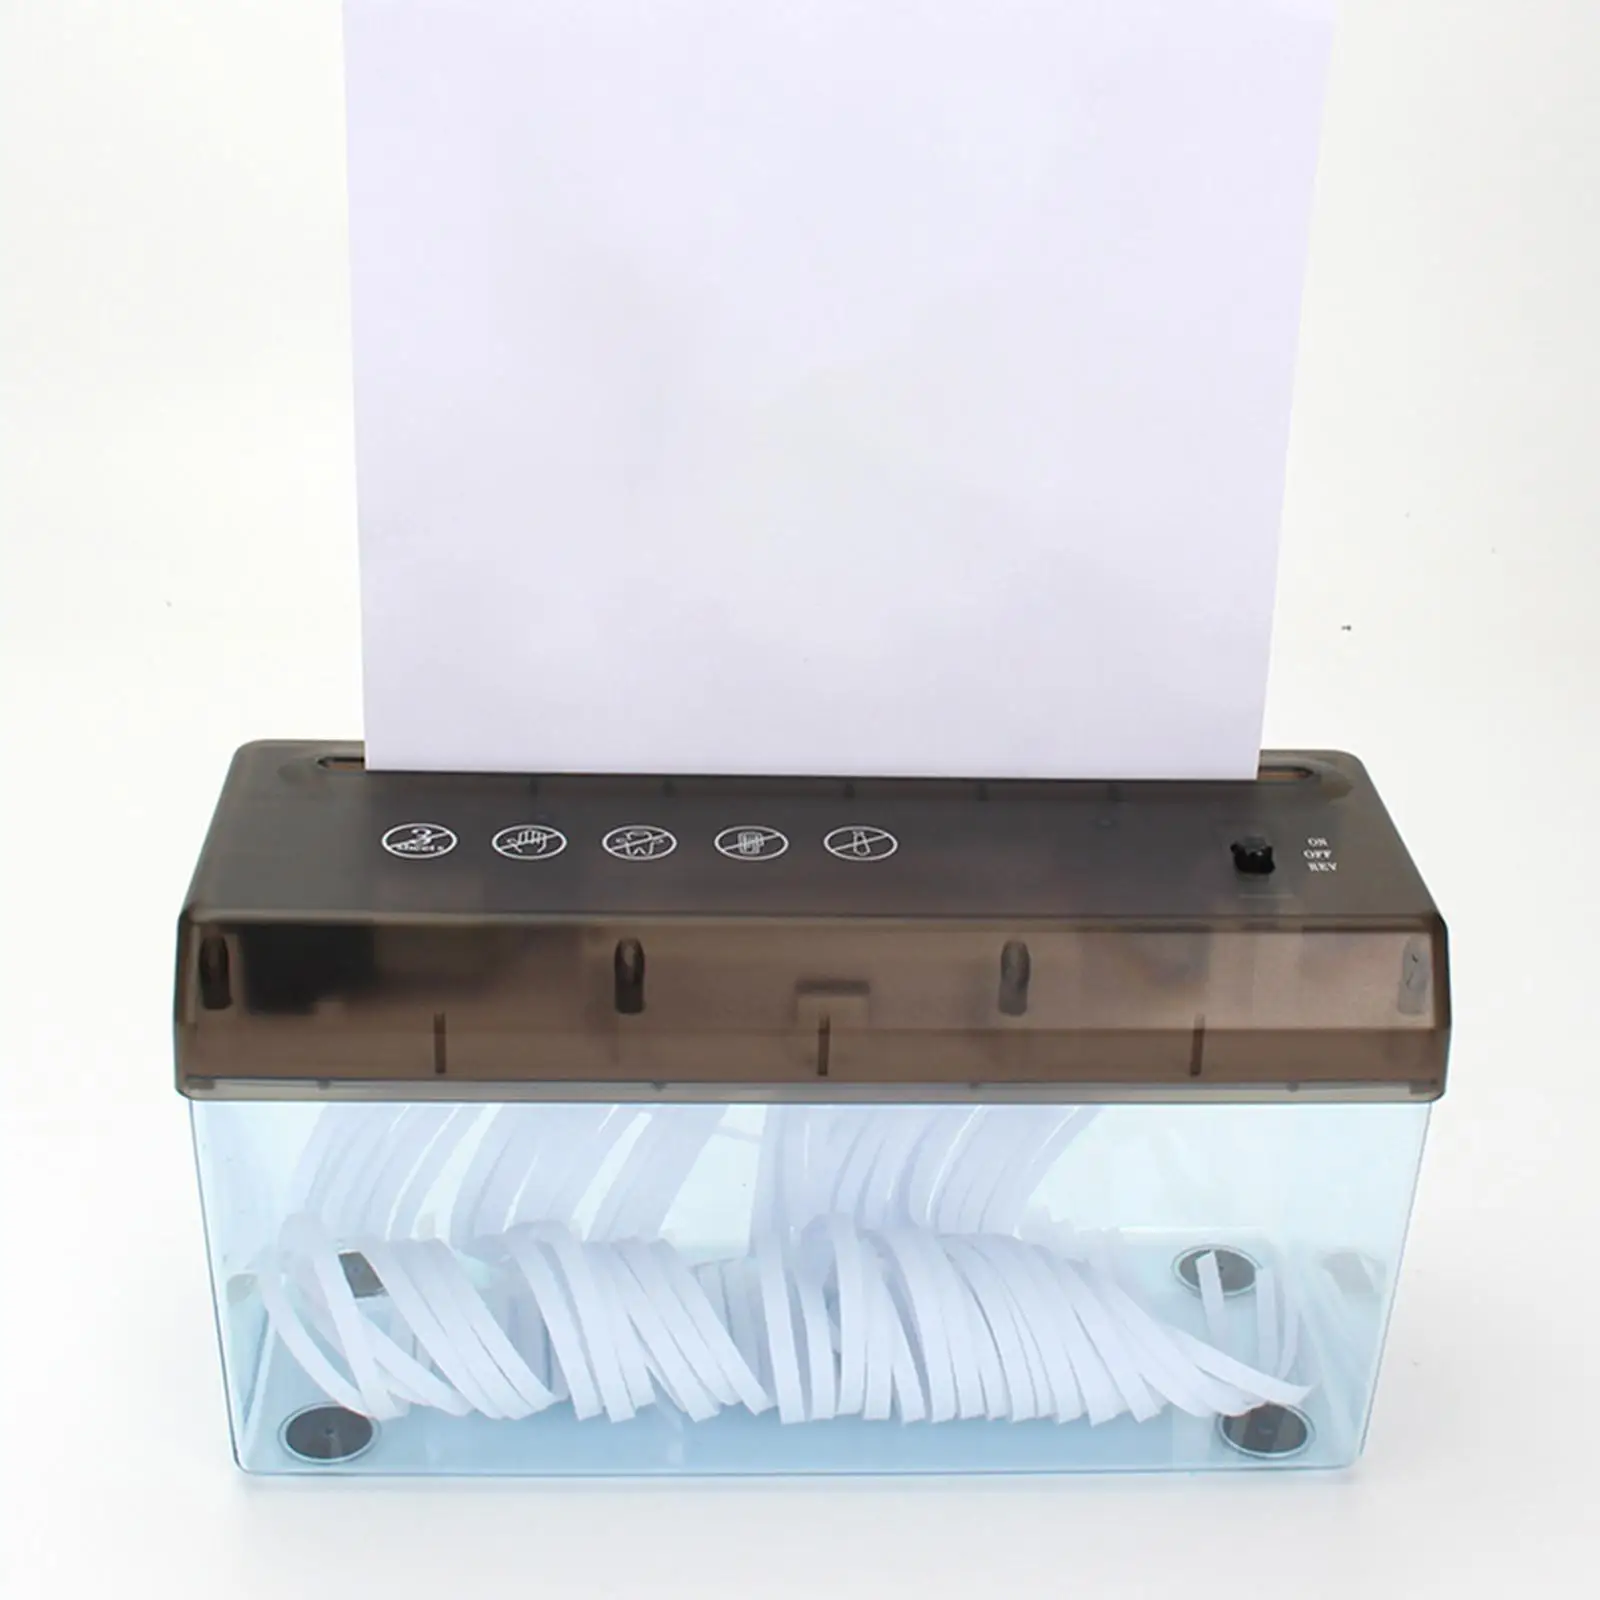 Portable Paper Shredder, Mini Paper Cutting Machine, A4 Documents Cutting Tool for Commercial Office Desktop Stationery Paper